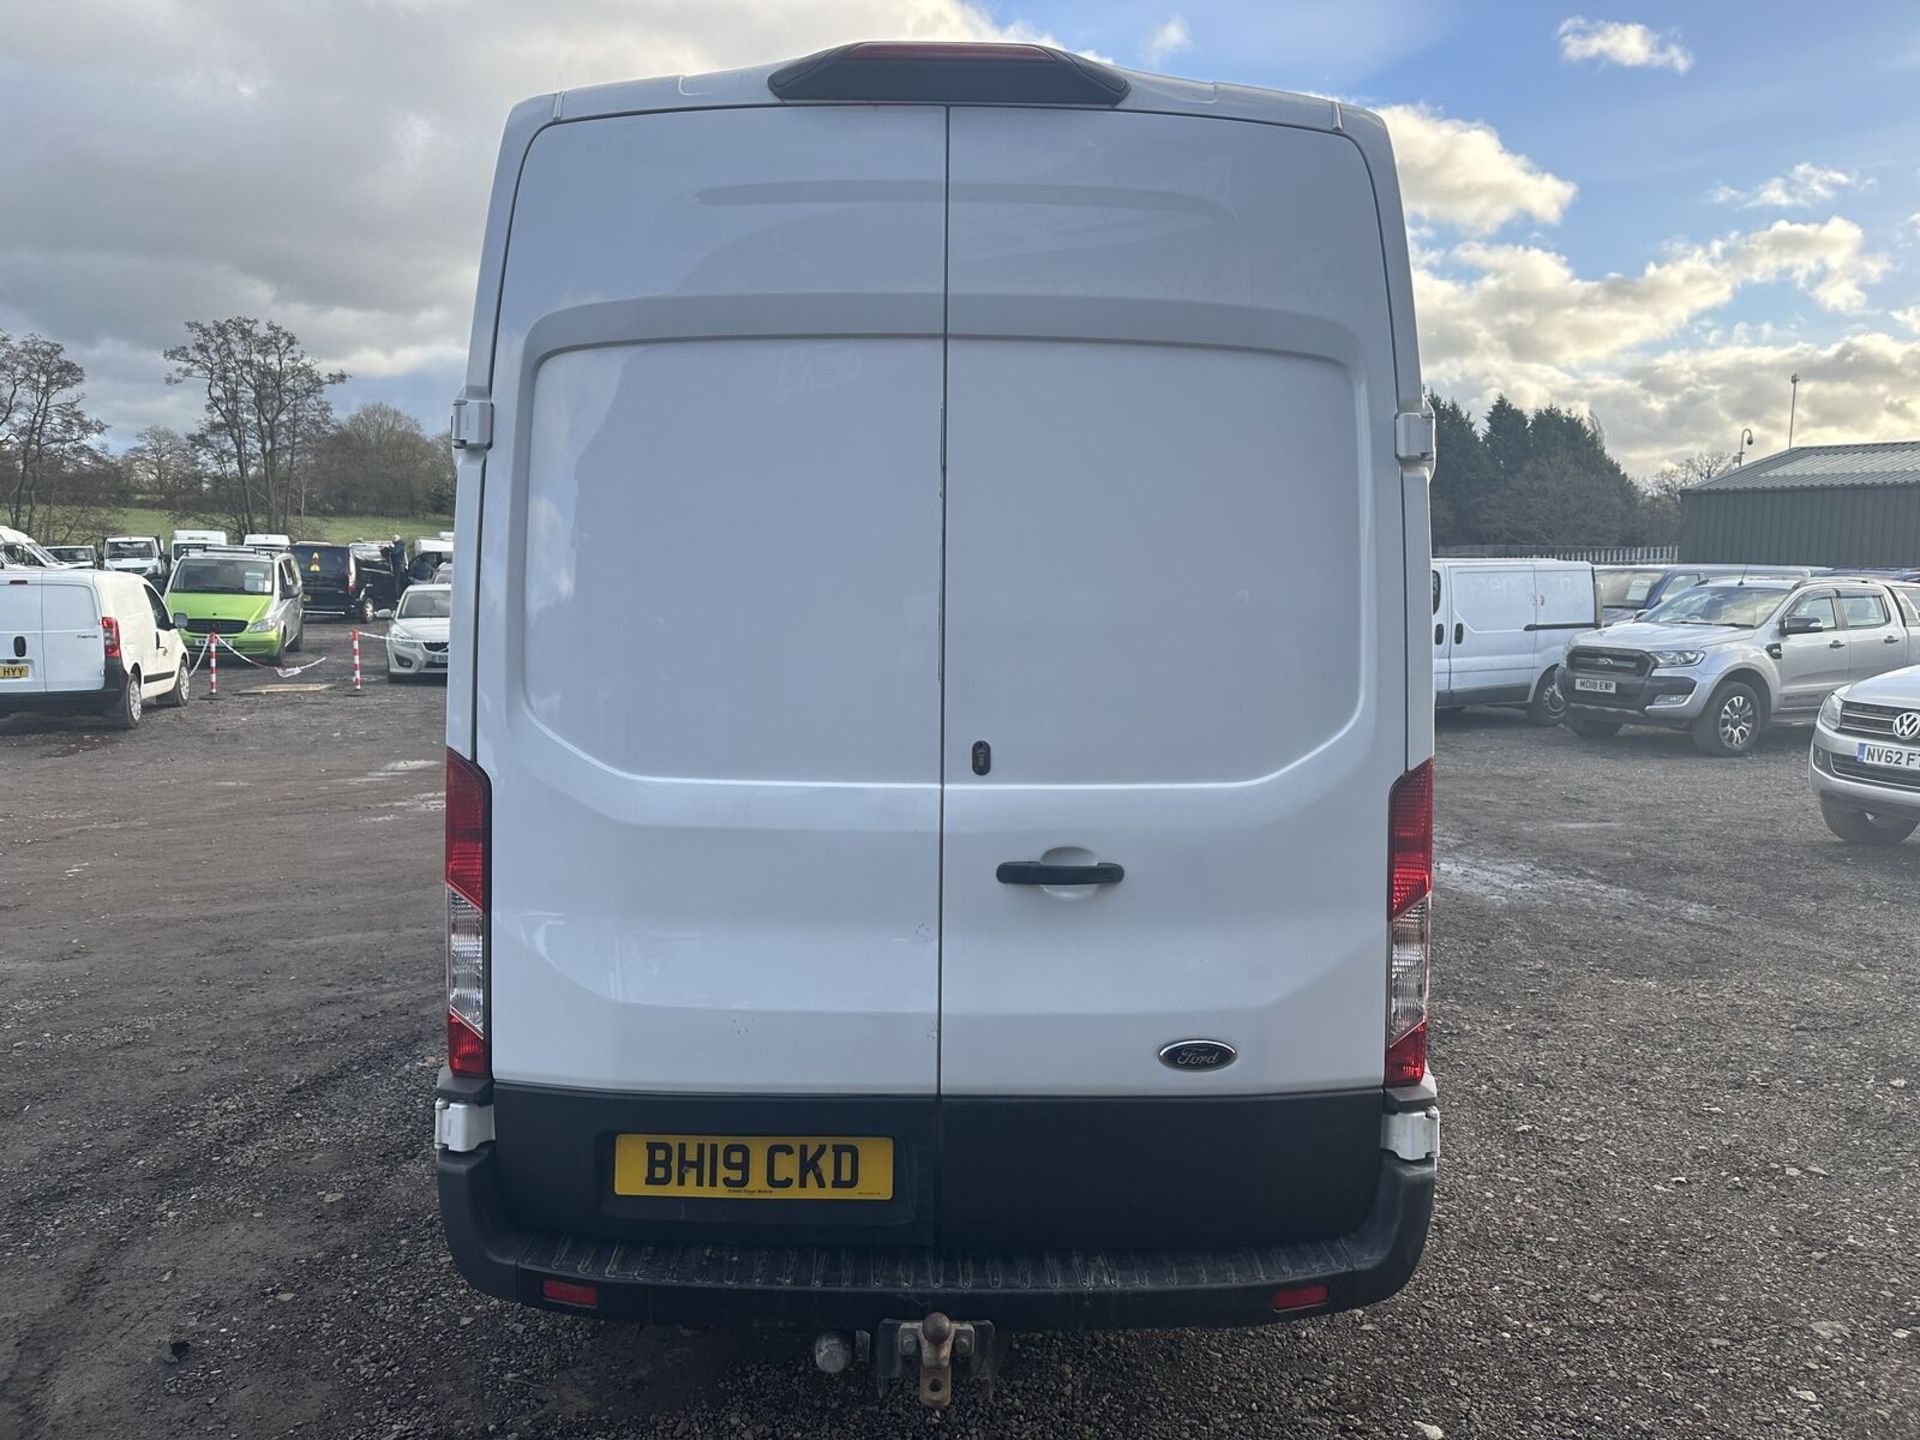 RELIABLE WORKHORSE: 2019 FORD TRANSIT L3 DIESEL, READY FOR DUTY - Image 4 of 15